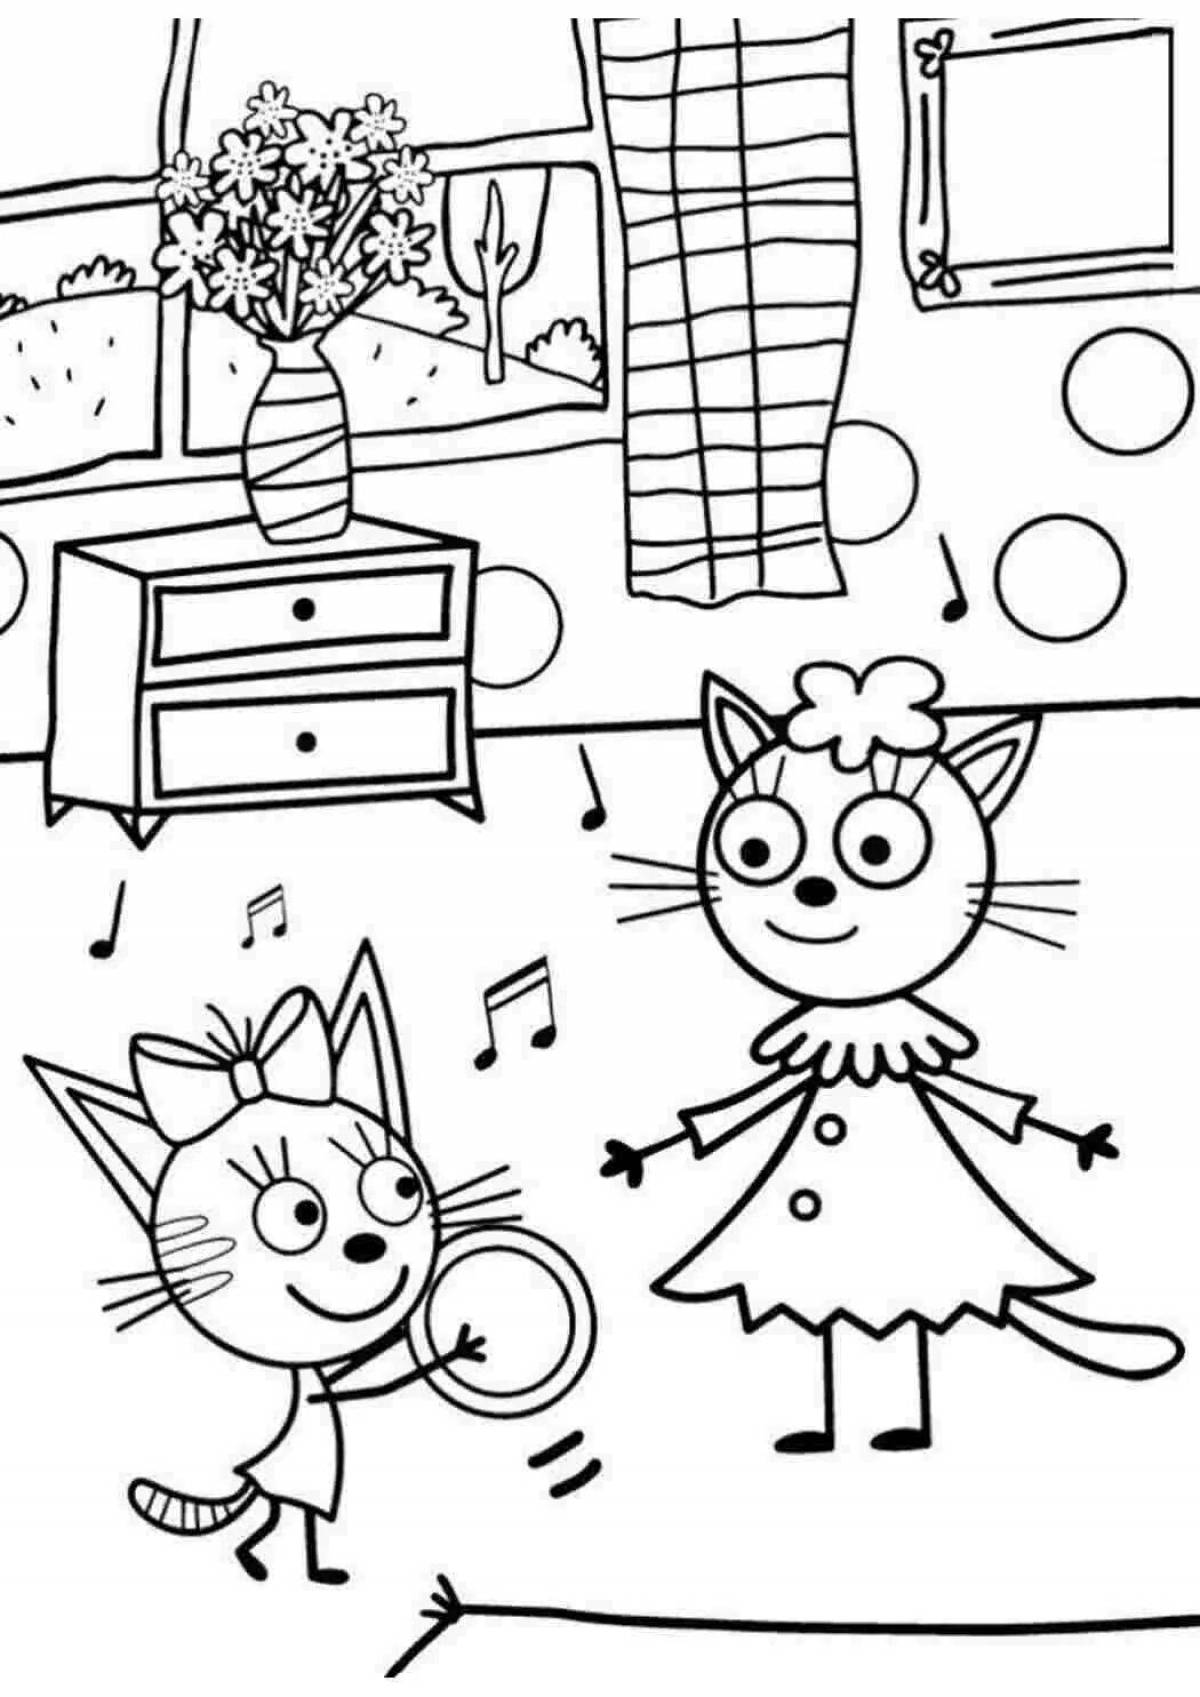 Creative coloring for girls 3 years 3 cats